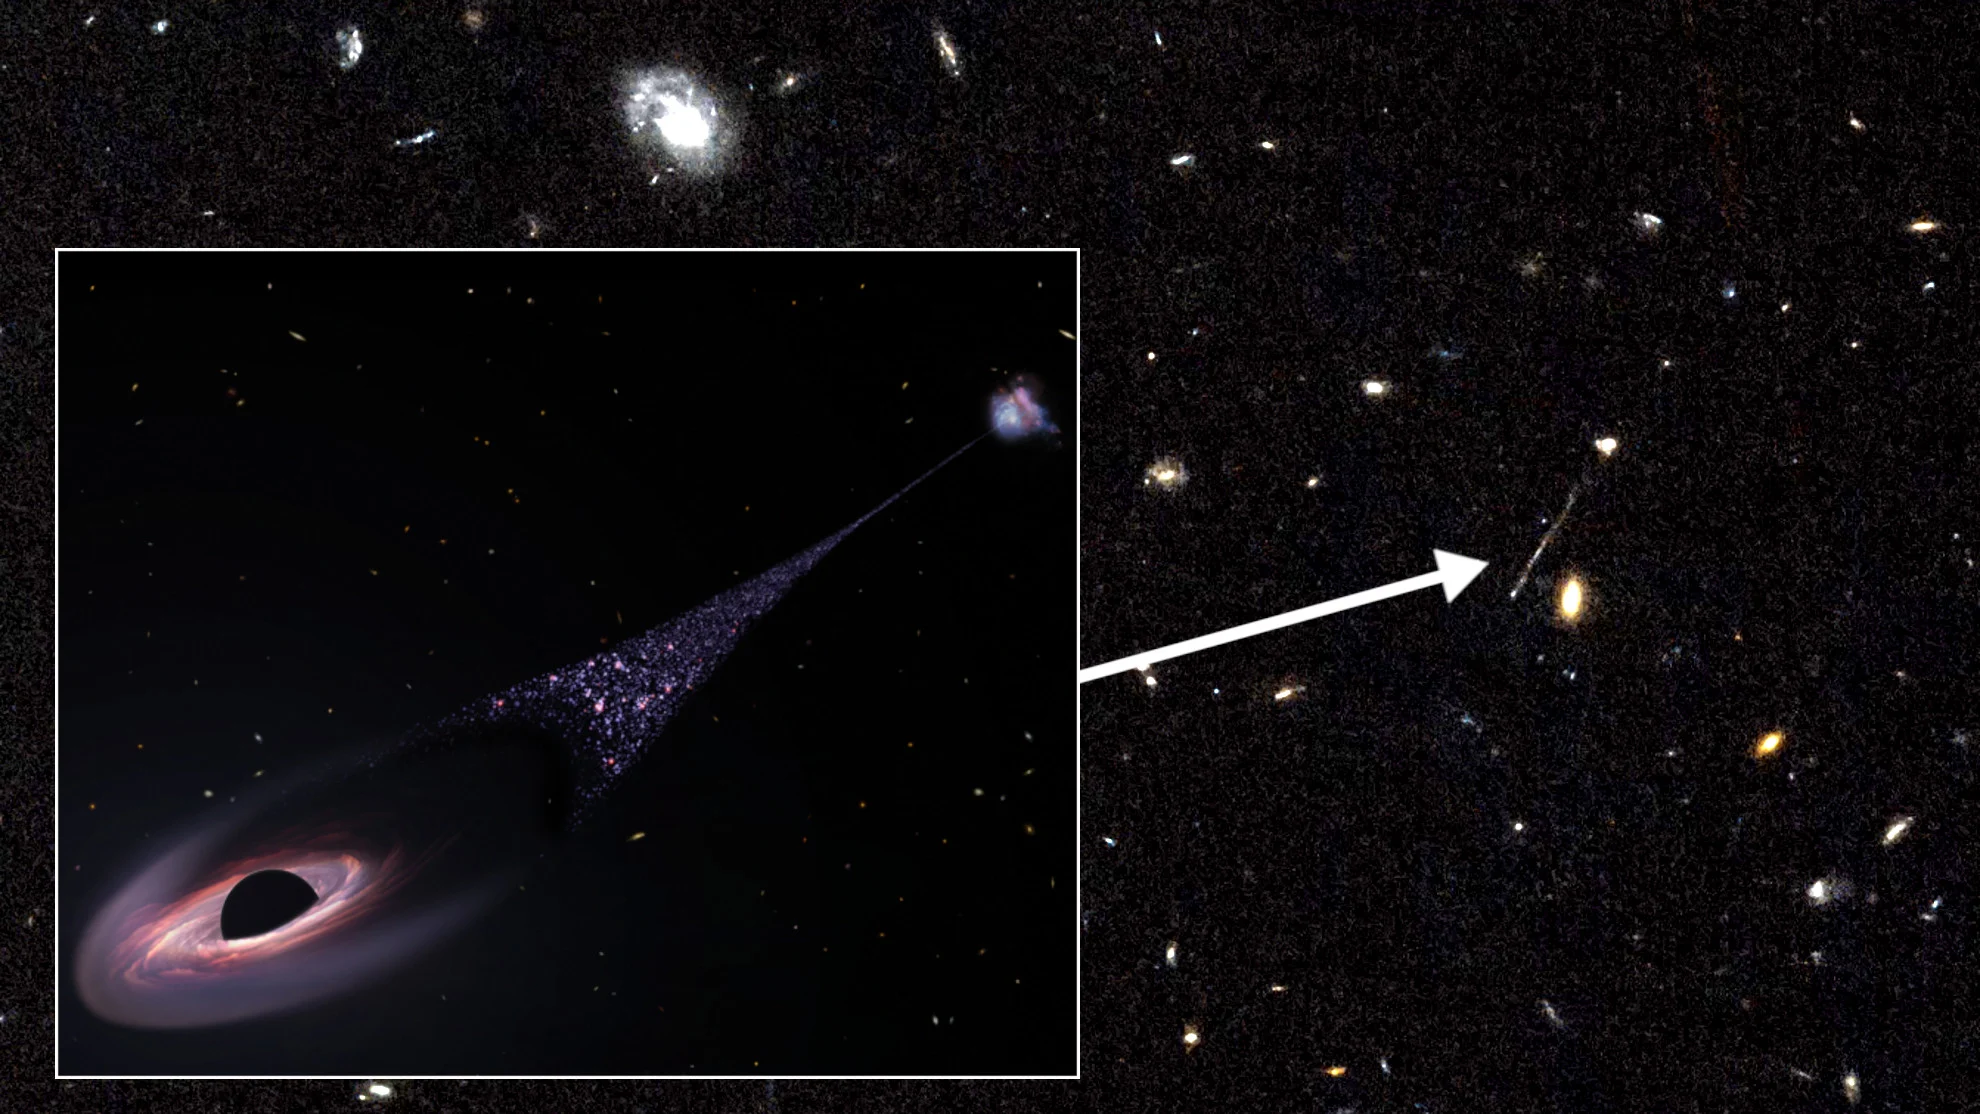 Hubble spots 'runaway' black hole leaving trail of bright stars in its wake